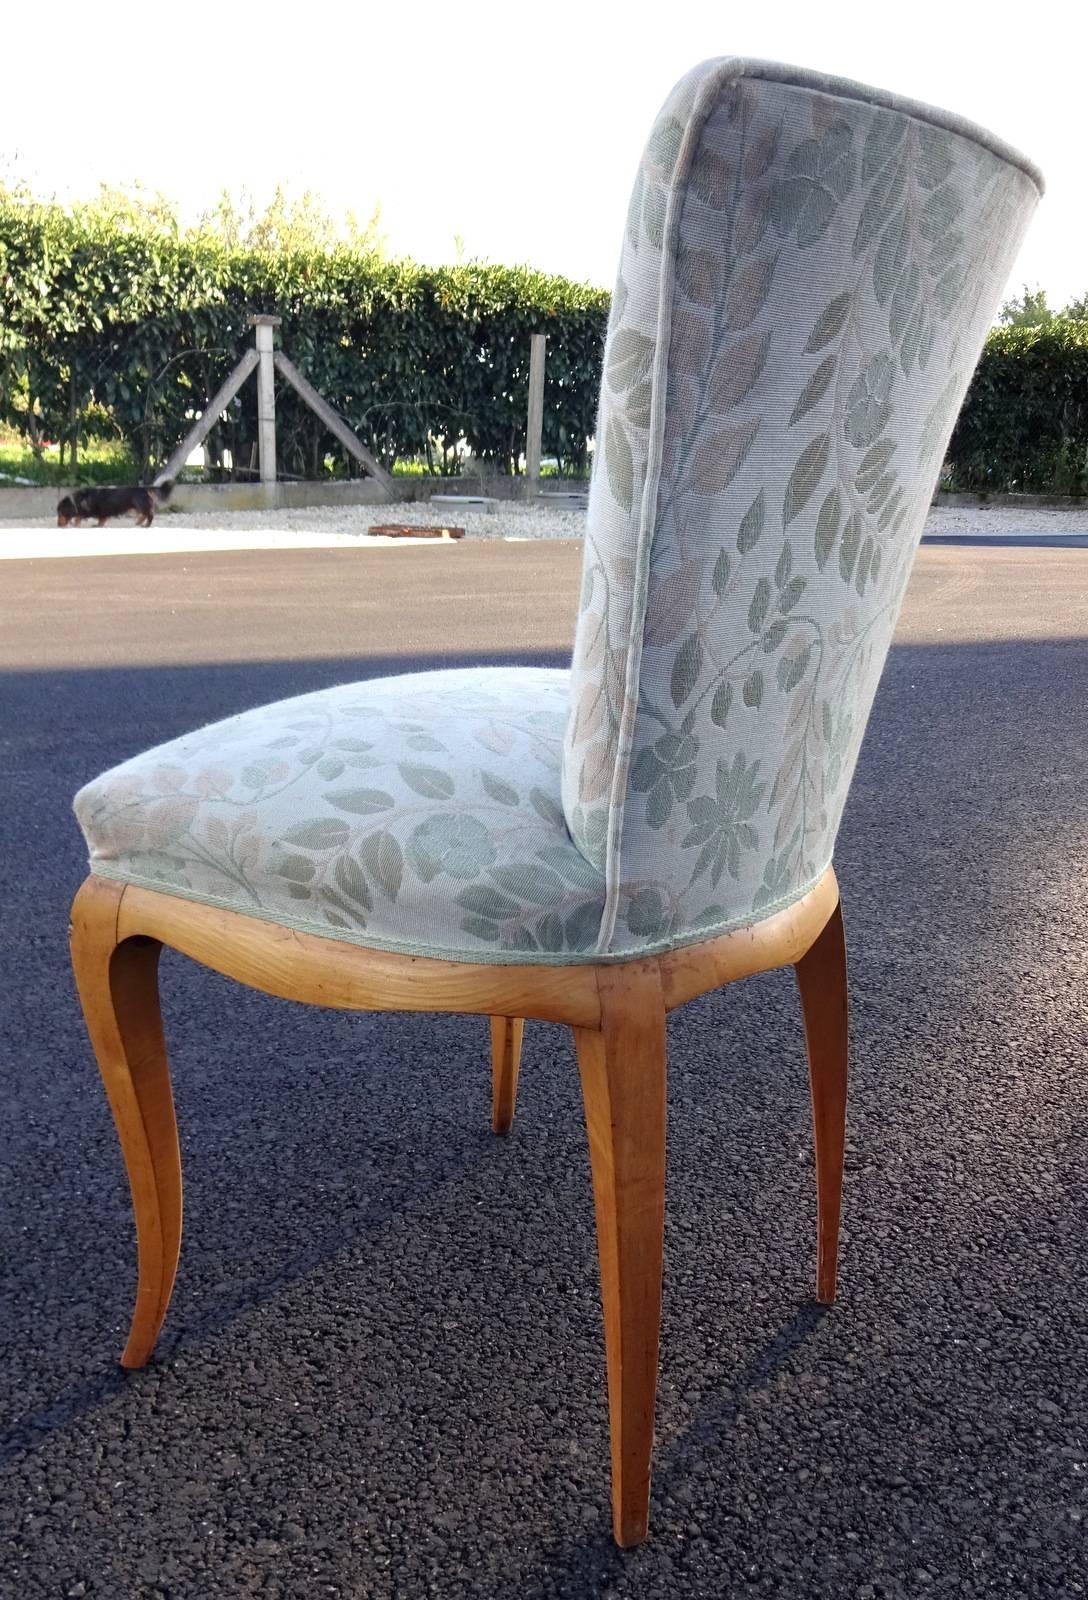 Sycamore Rene Prou Side Chair